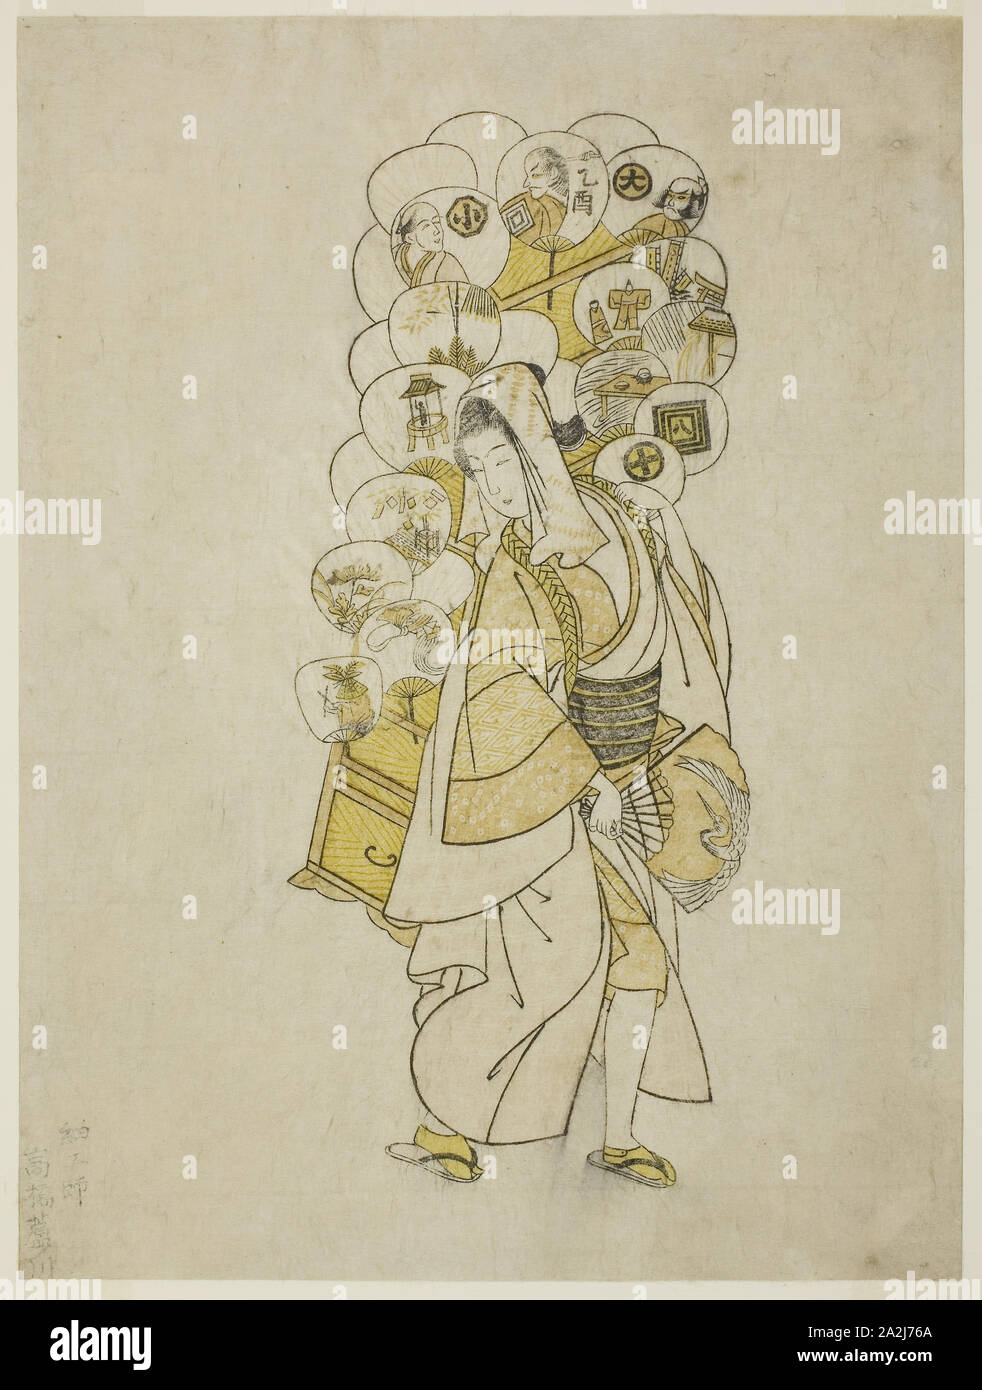 The Fan Peddler, 1765, Attributed to Suzuki Harunobu 鈴木 春信, Japanese, 1725 (?)–1770, Japan, Color woodblock print, chuban, 26.4 x 19.7 cm (10 3/8 x 7 3/4 in.), The Complaint, and The Consolation, or, Night Thoughts, 1797, William Blake (English, 1757-1827), written by Edward Young (English, 1683-1765), printed by R. Noble (English, 18th century), published by R. Edwards (English, 18th century), England, Book with forty-three engravings in black on ivory wove paper, 433 × 340 × 22 mm, The Grave, a Poem, 1808, Luigi Schiavonetti (Italian, 1765-1810), after William Blake (English, 1757-1827 Stock Photo